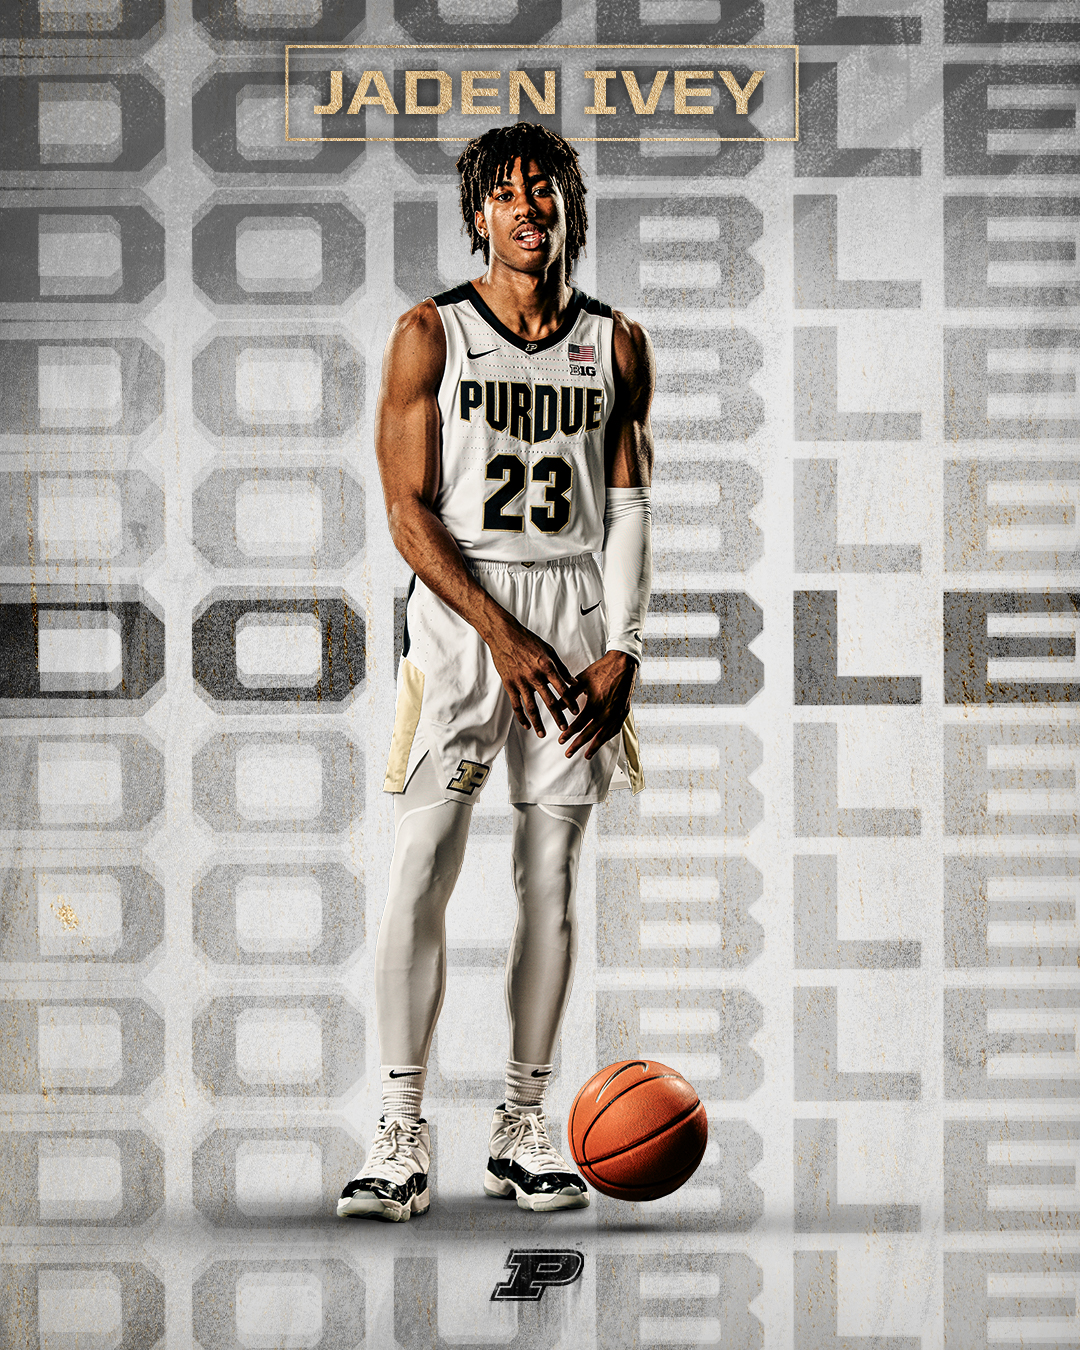 Purdue Mens Basketball Career Double Double For Jaden Ivey. AT ANY LEVEL! PTS: 22 REBS: 10 ASTS: 6